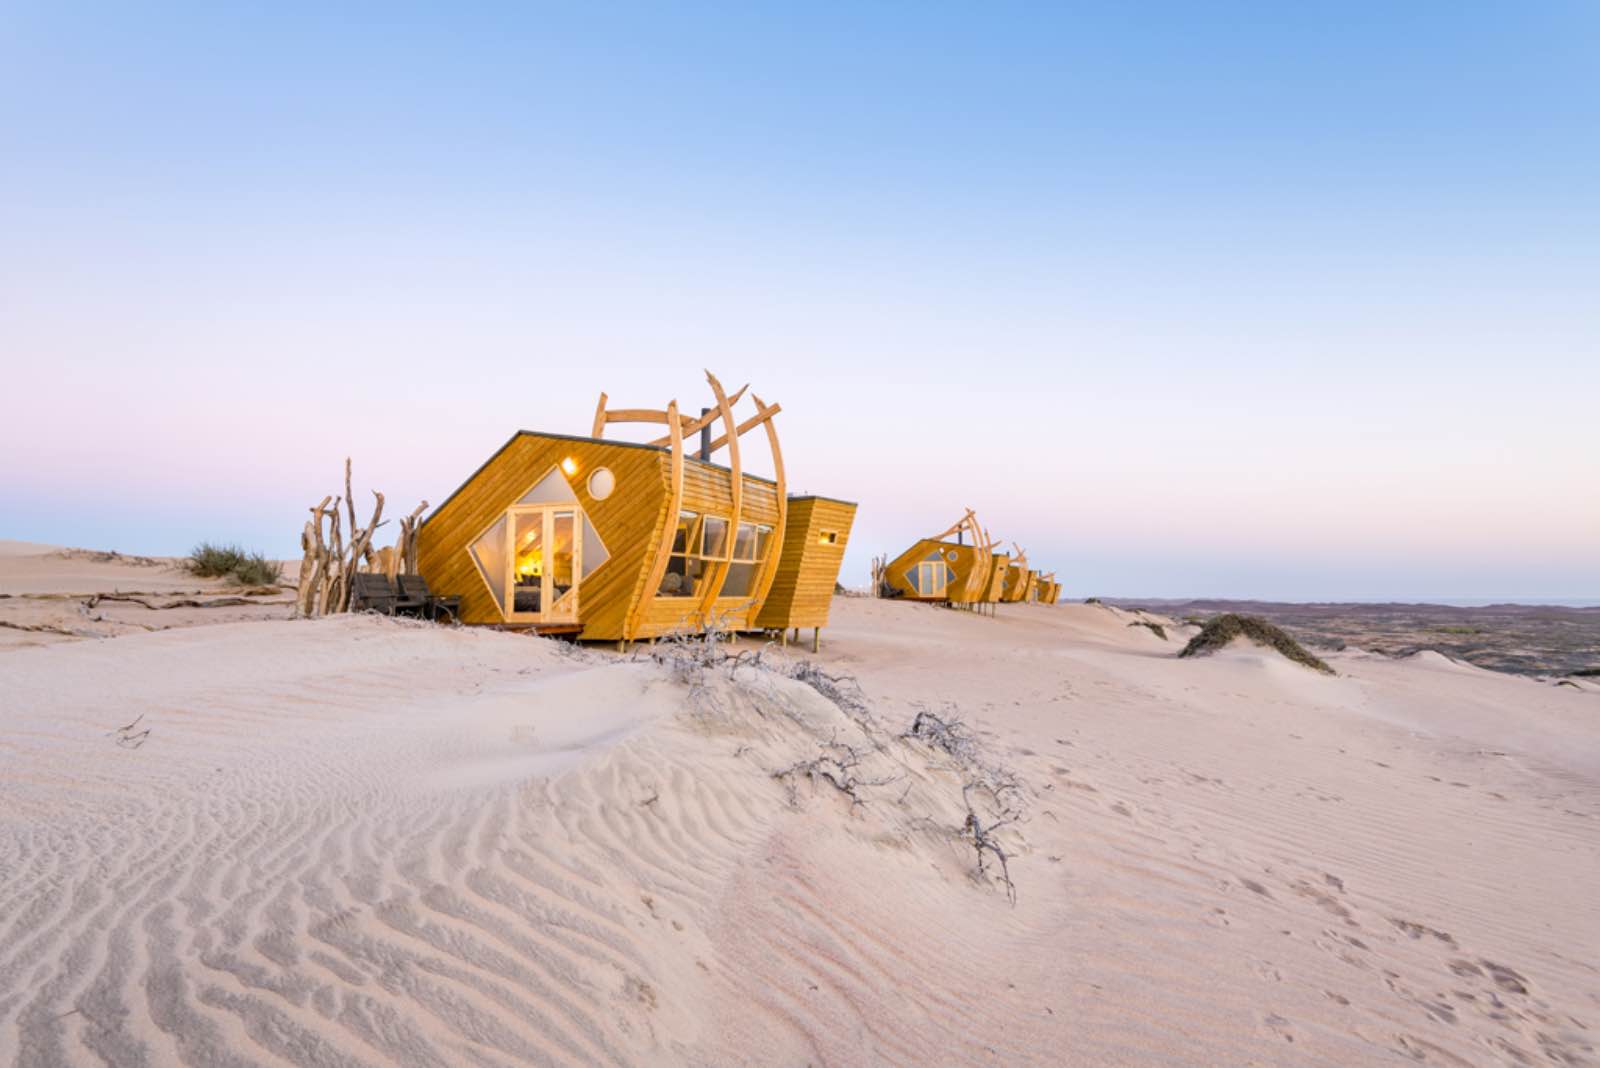 Our Expert’s Opinion on a Desert Safari: Top 10 Lodges in Namibia